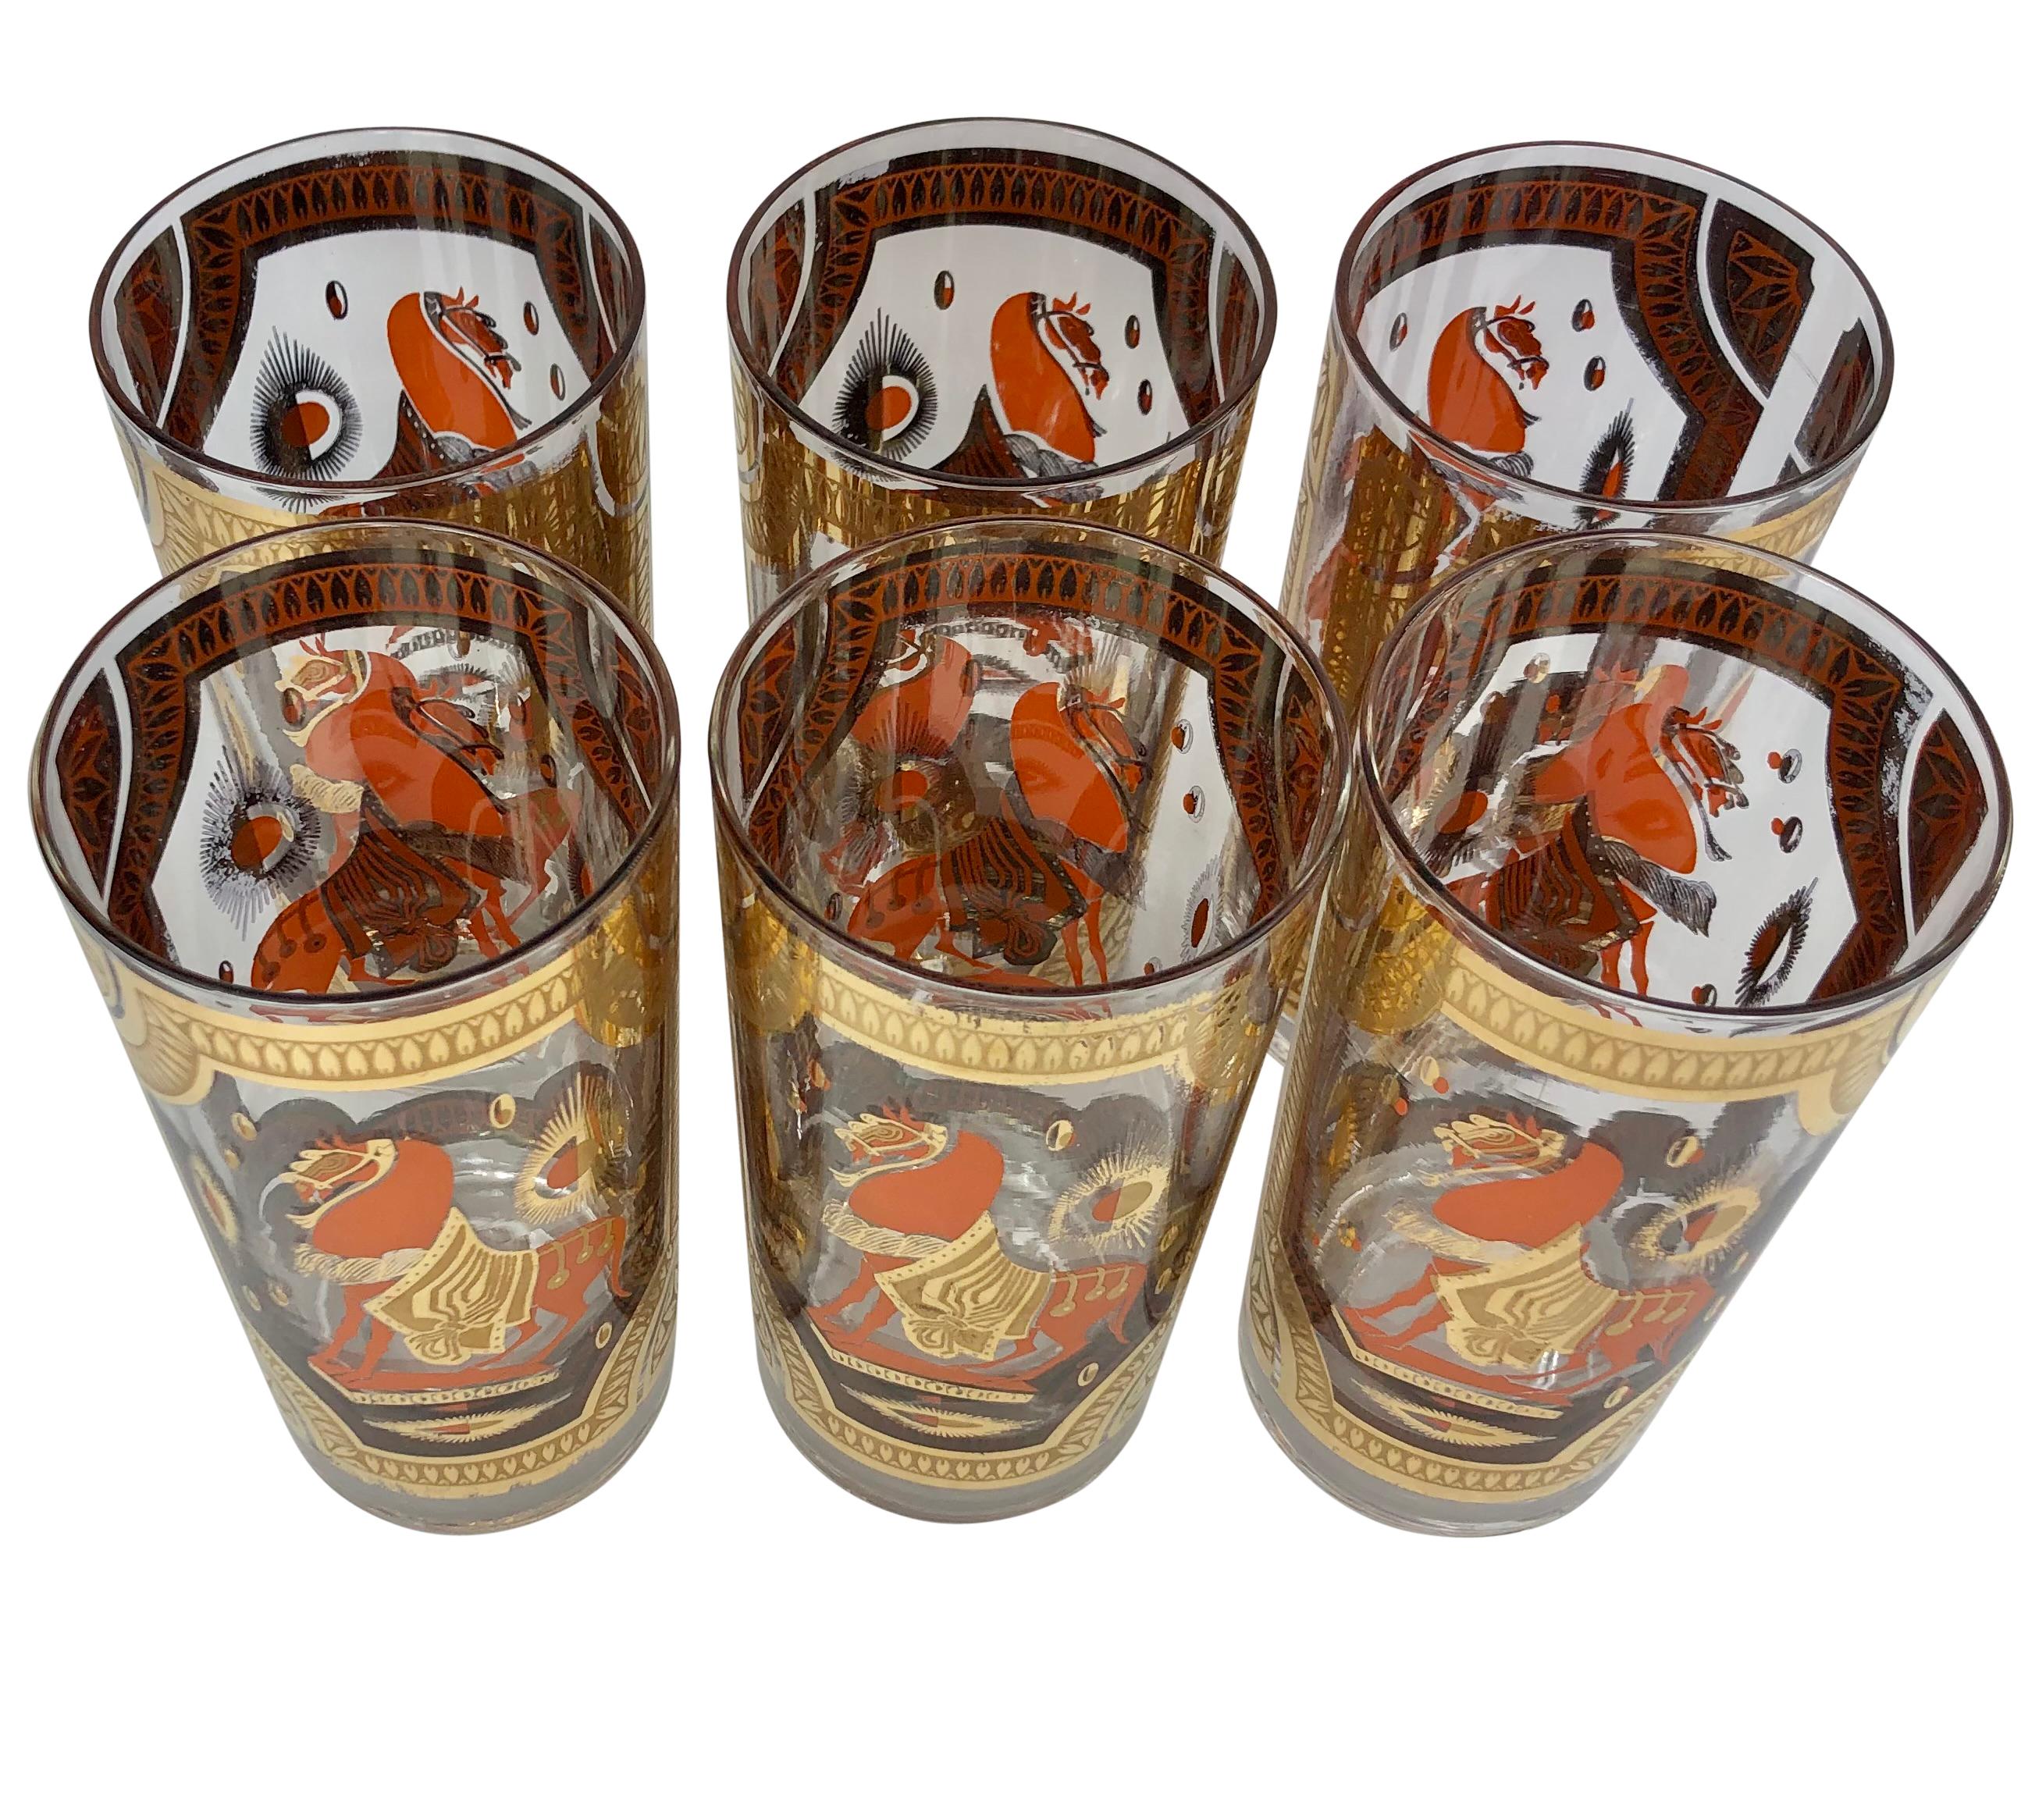  Set of 6 Vintage Fred Press Orange and 22K Gold Trojan Horse Highball Glasses. Designed with vibrantly colored prancing horses with with bold gold borders in 22k gold. Glasses measure 5 1/2